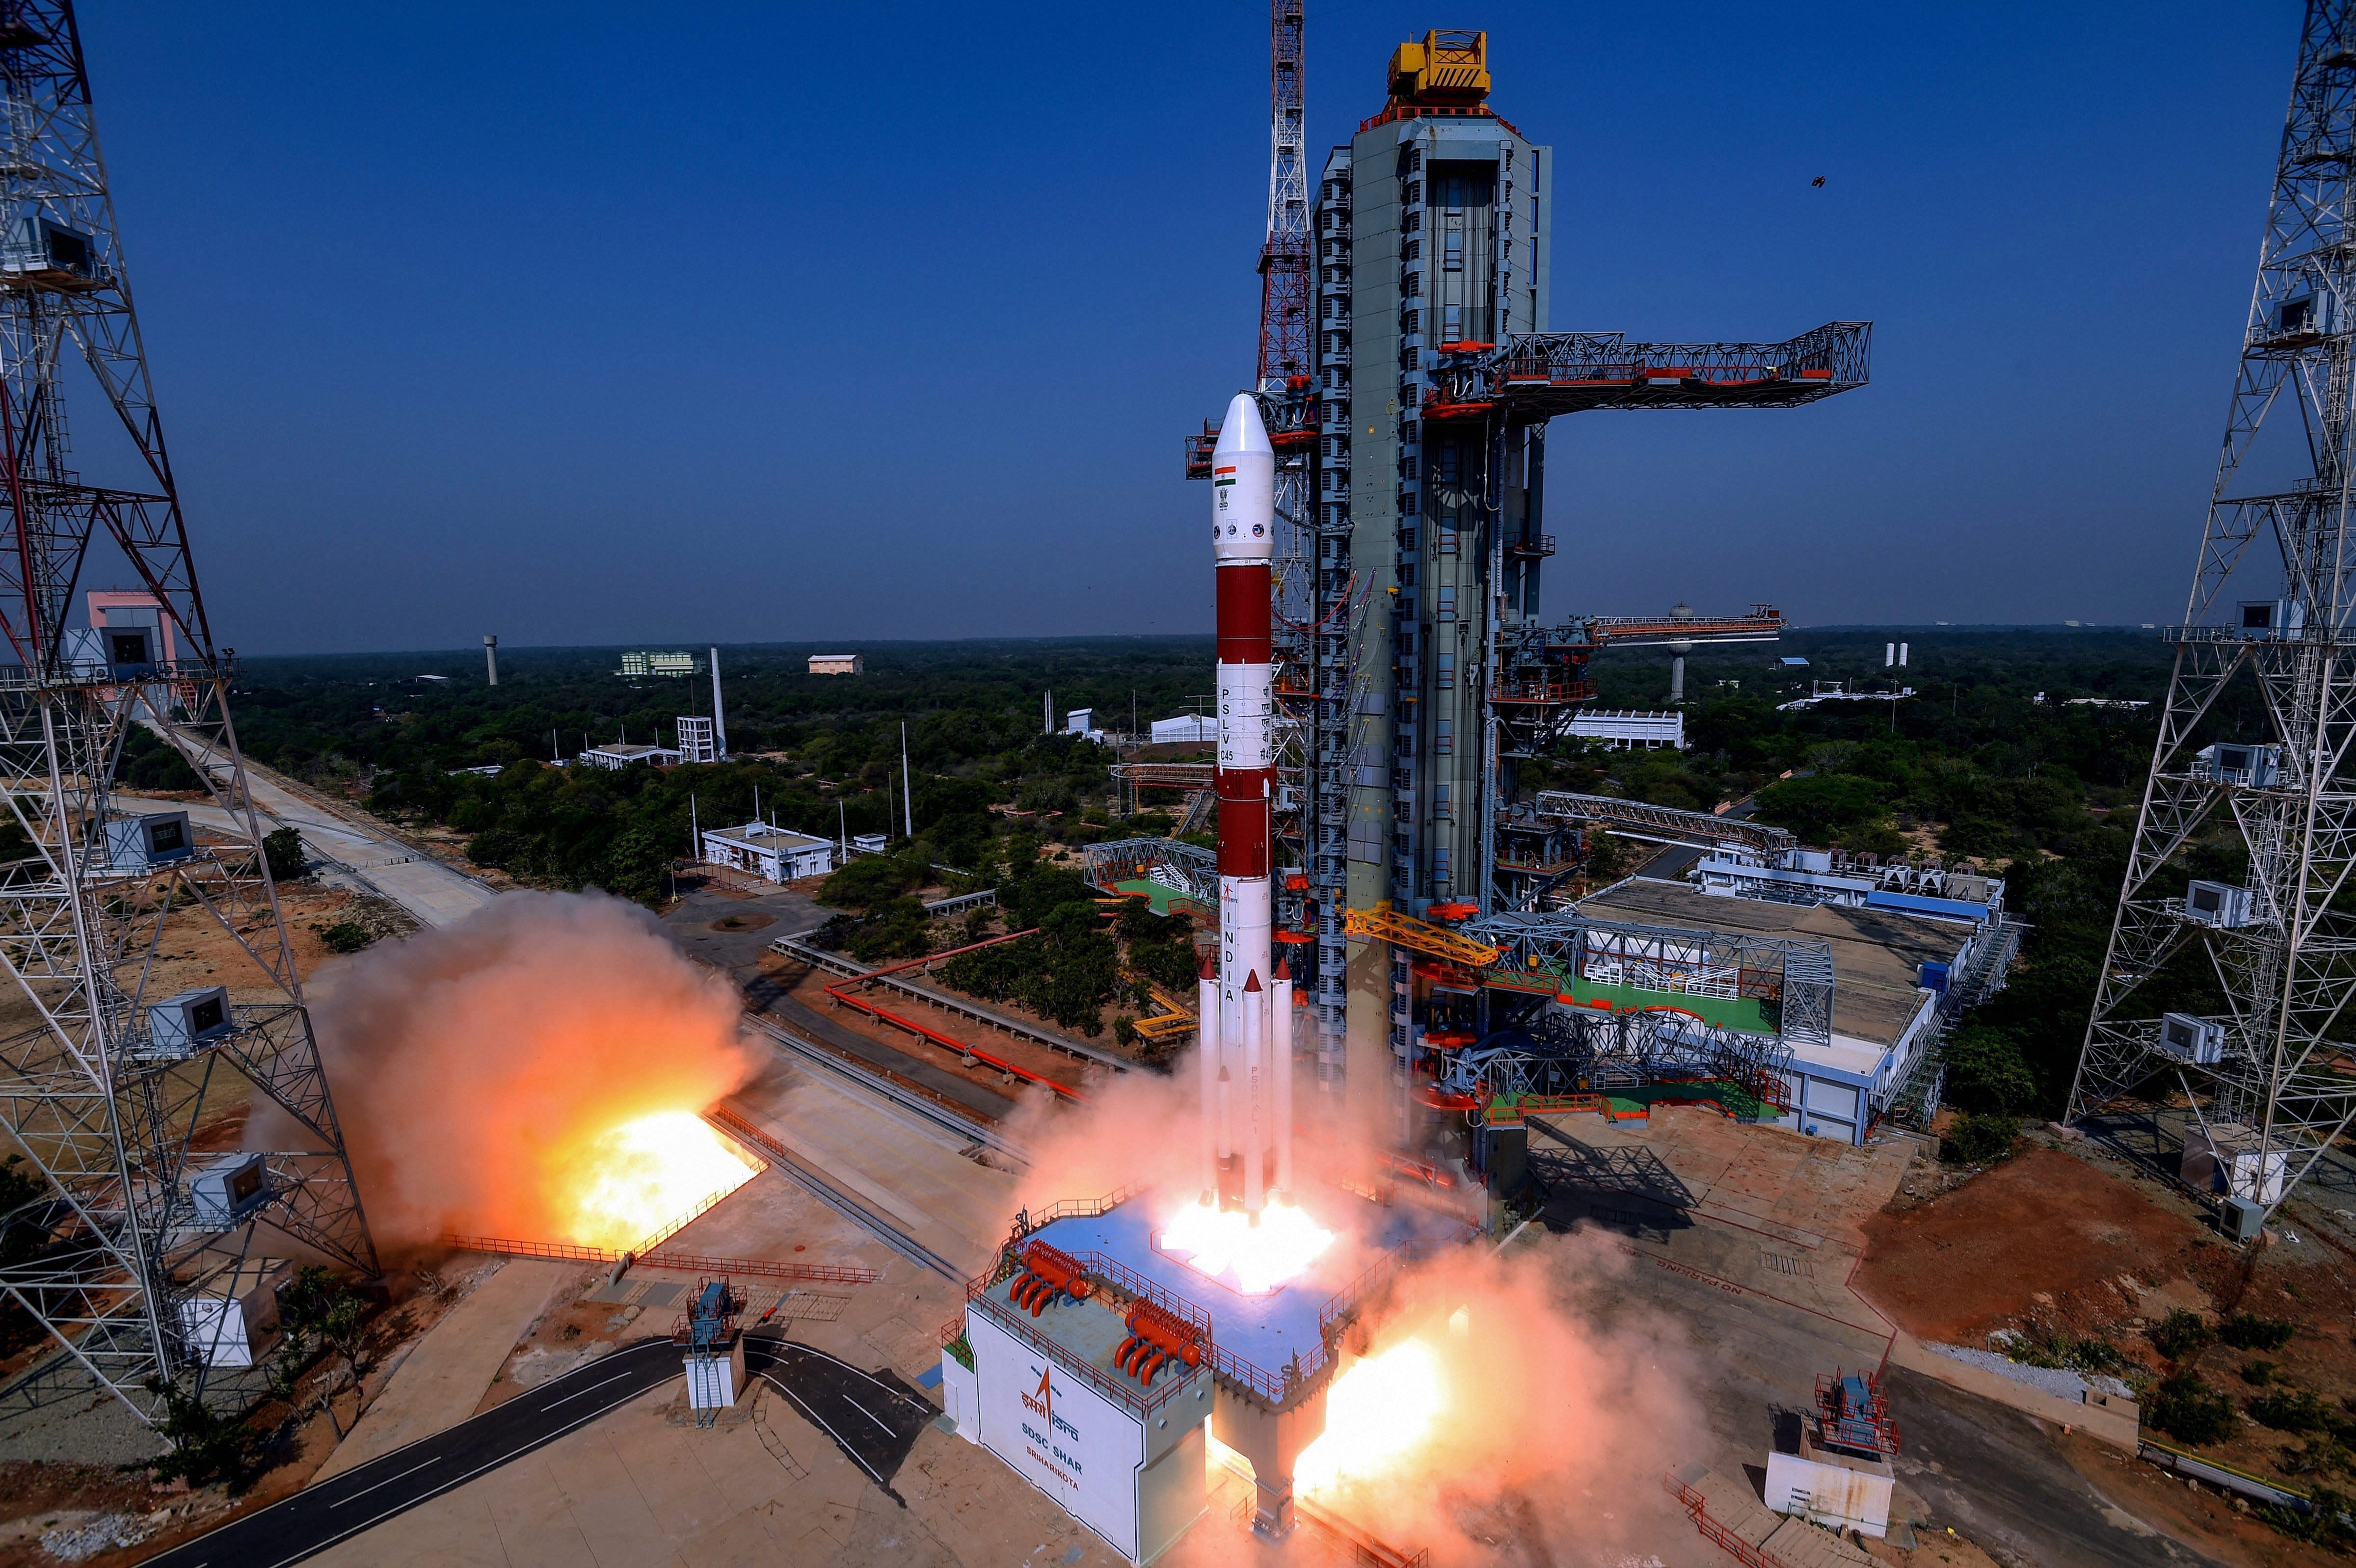 Indian Space Research Organisation (ISRO)’s PSLV-C45 carrying EMISAT and 28 other satellites lifts off from the Satish Dhawan Space Centre in Sriharikota, Monday, April 1, 2019. (ISRO/ PTI Photo)